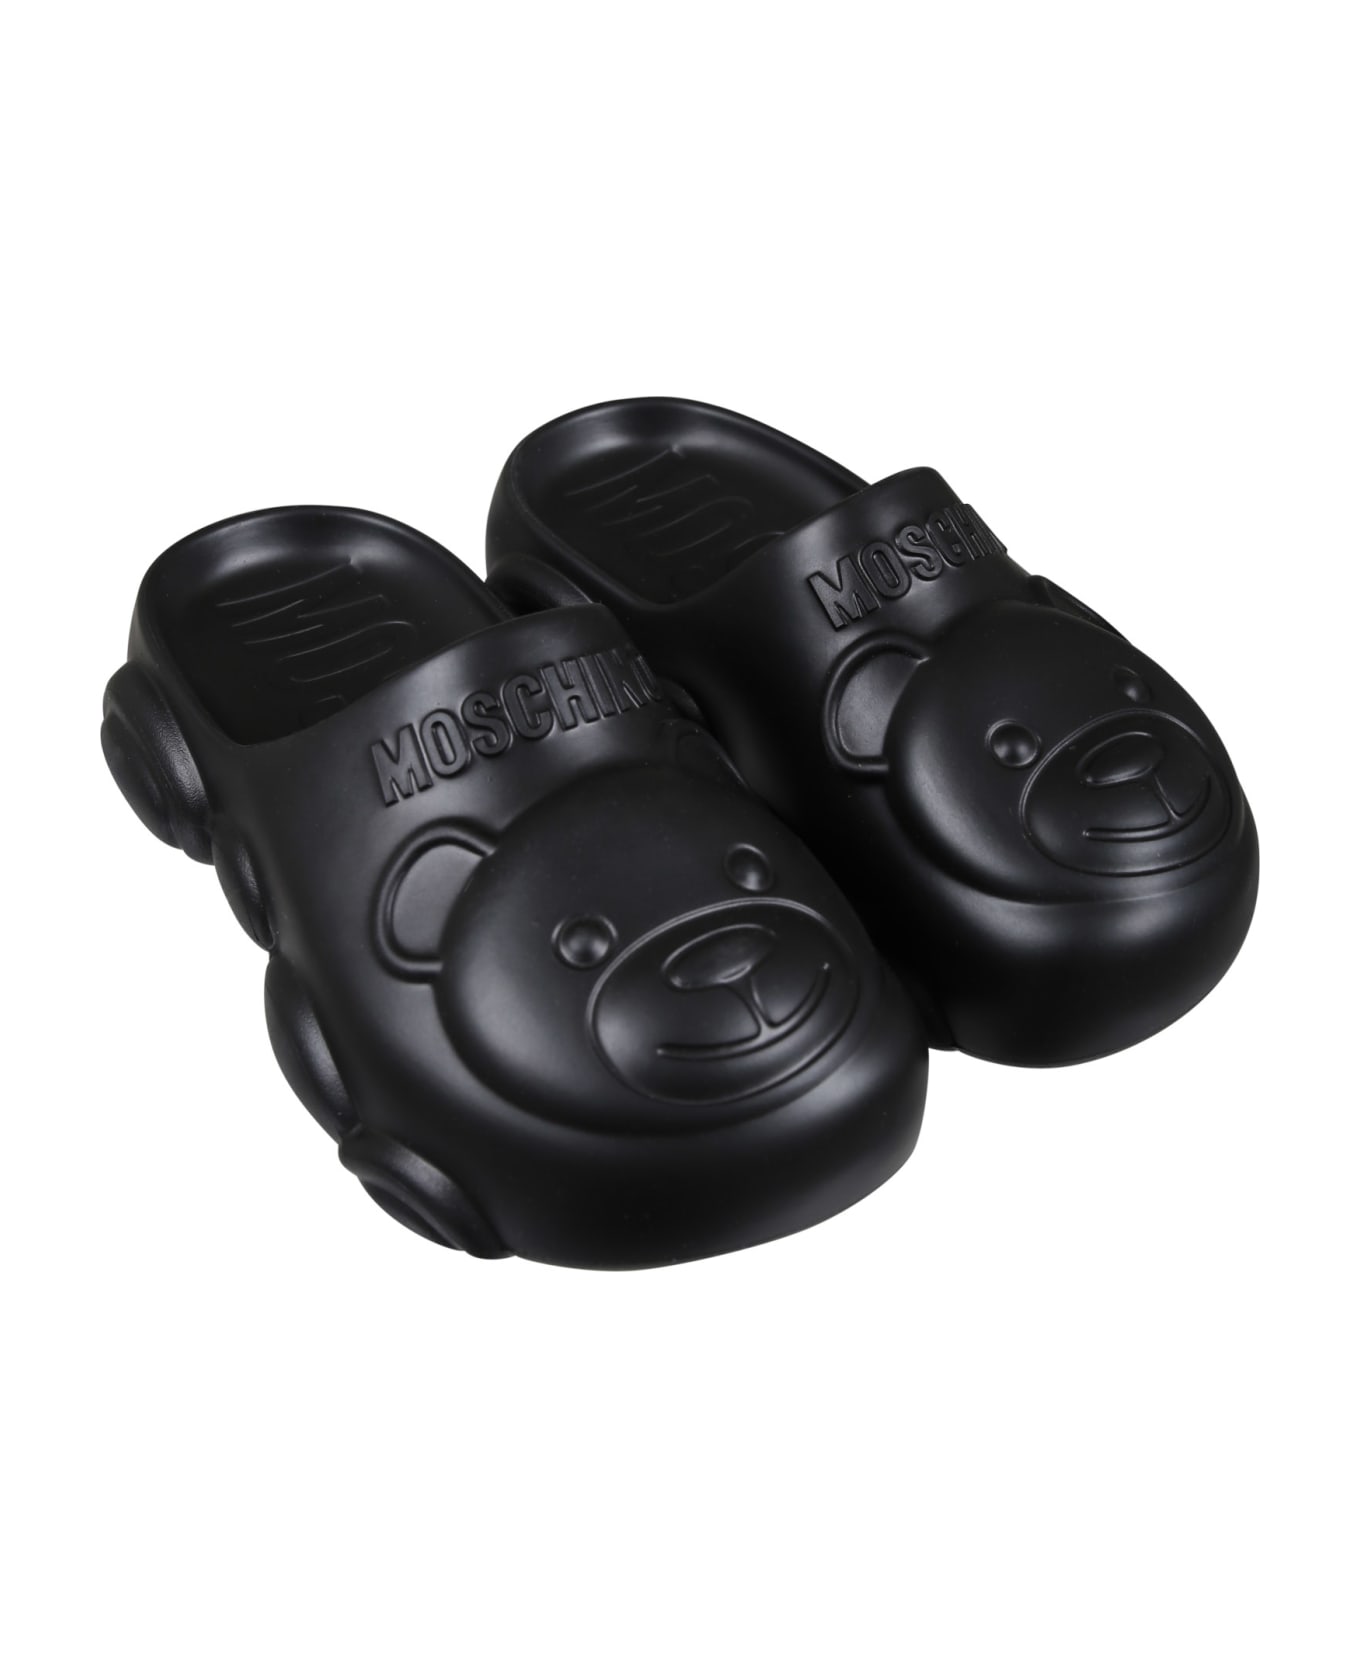 Moschino Black Mules For Kids With Teddy Bear - Black